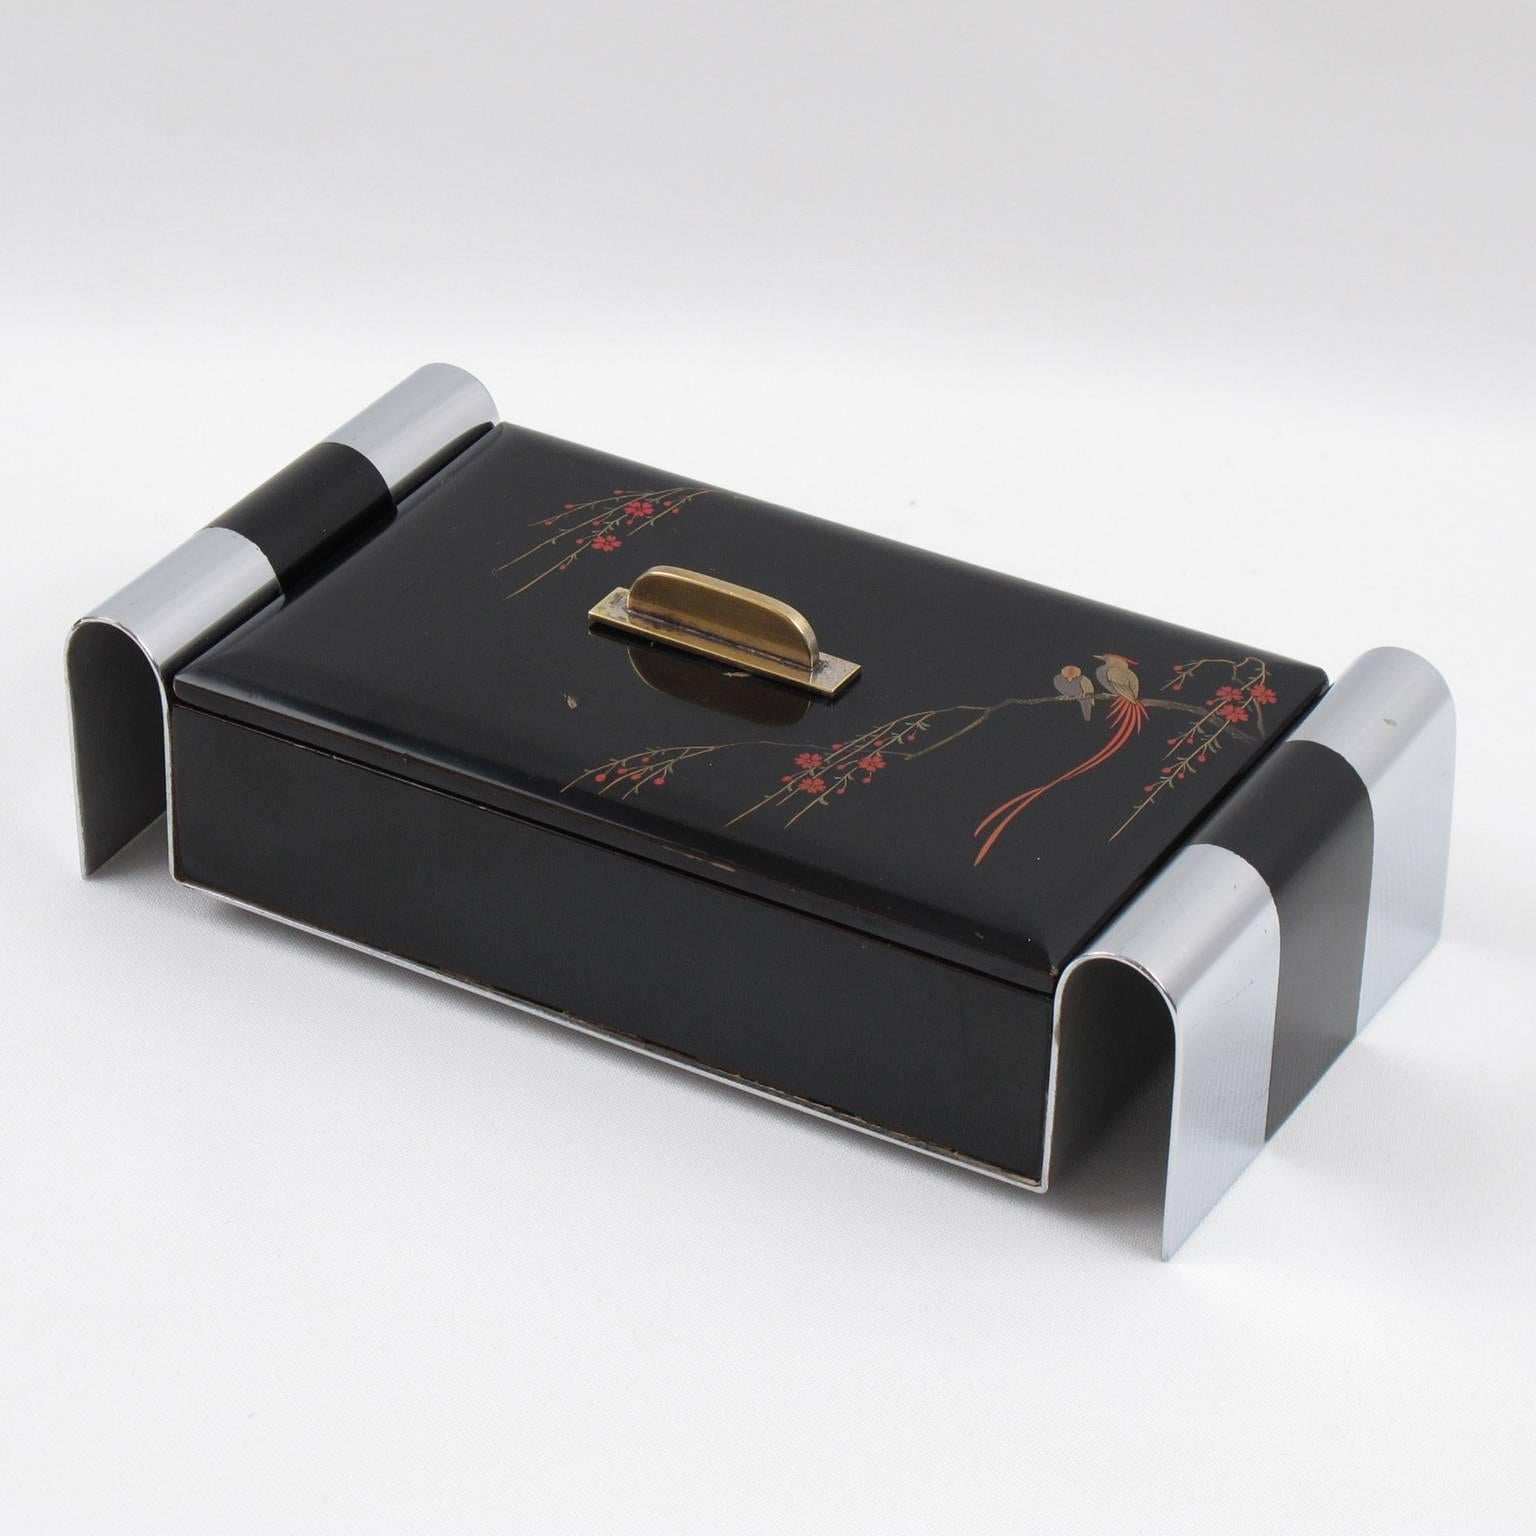 Superb Art Deco Japanese lacquer and chromed metal decorative box designed by Namiki for Alfred Dunhill, circa 1930s. Geometric shape with chrome sides. Main body in made of black lacquer on the outside and red lacquer on the inside with removable